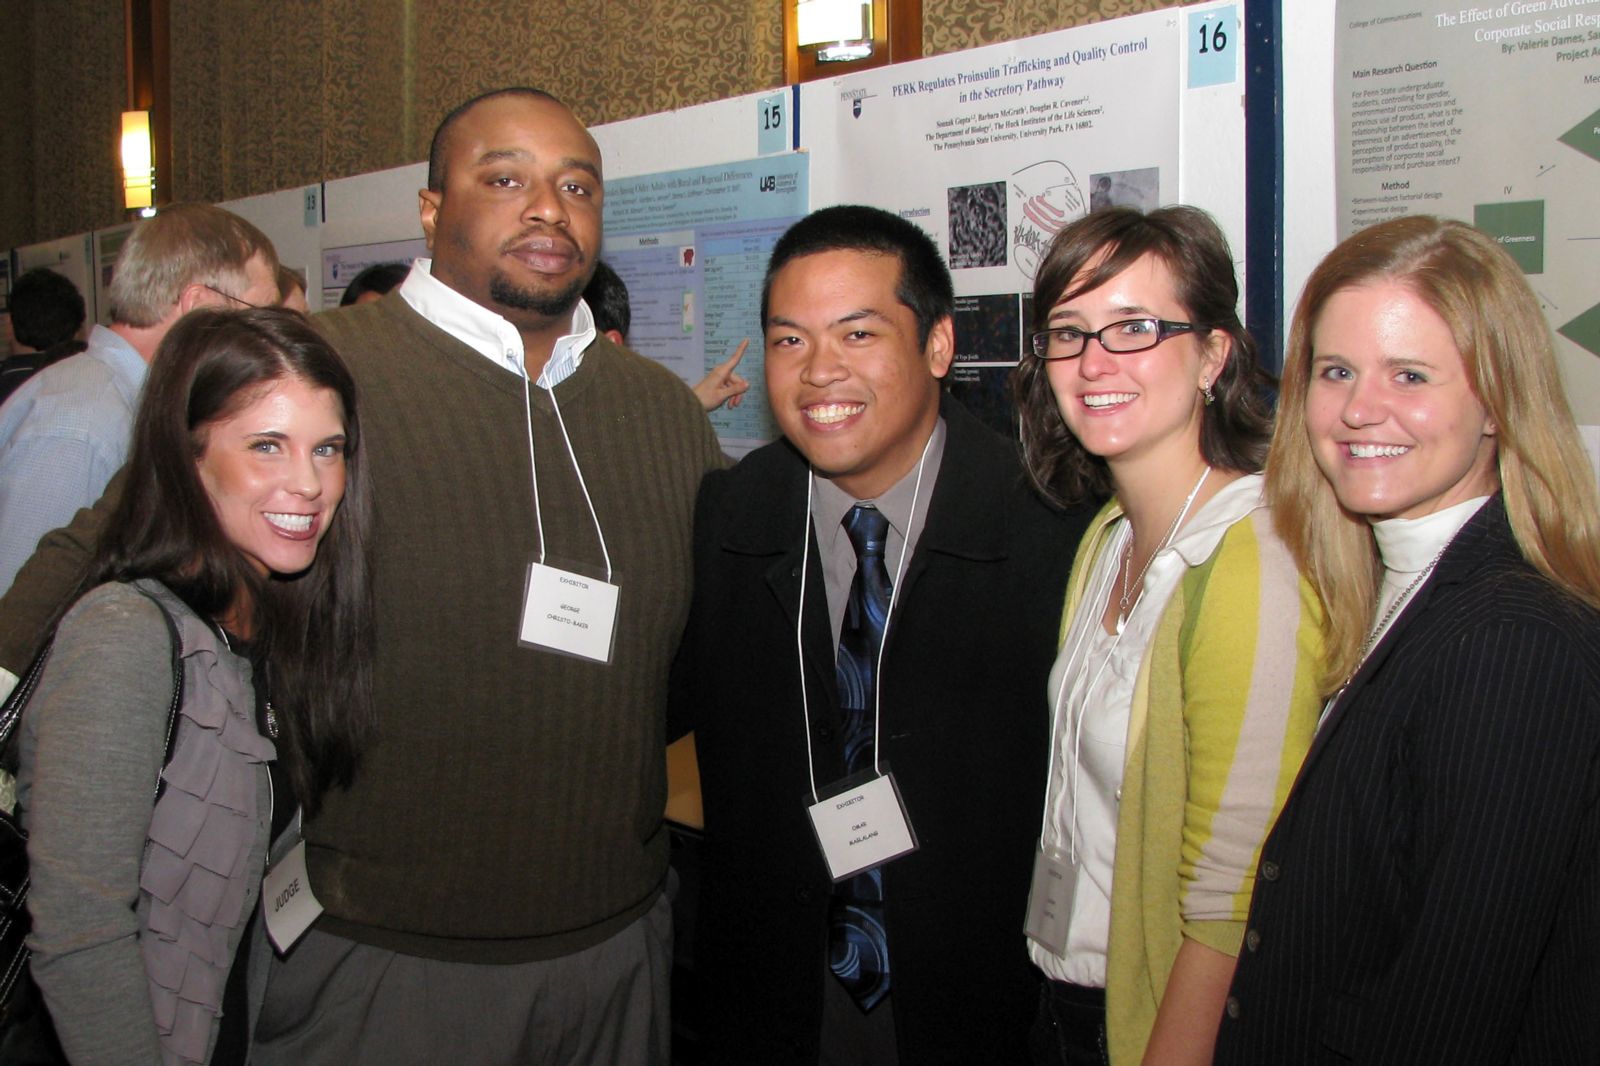 A group of Penn State graduate students